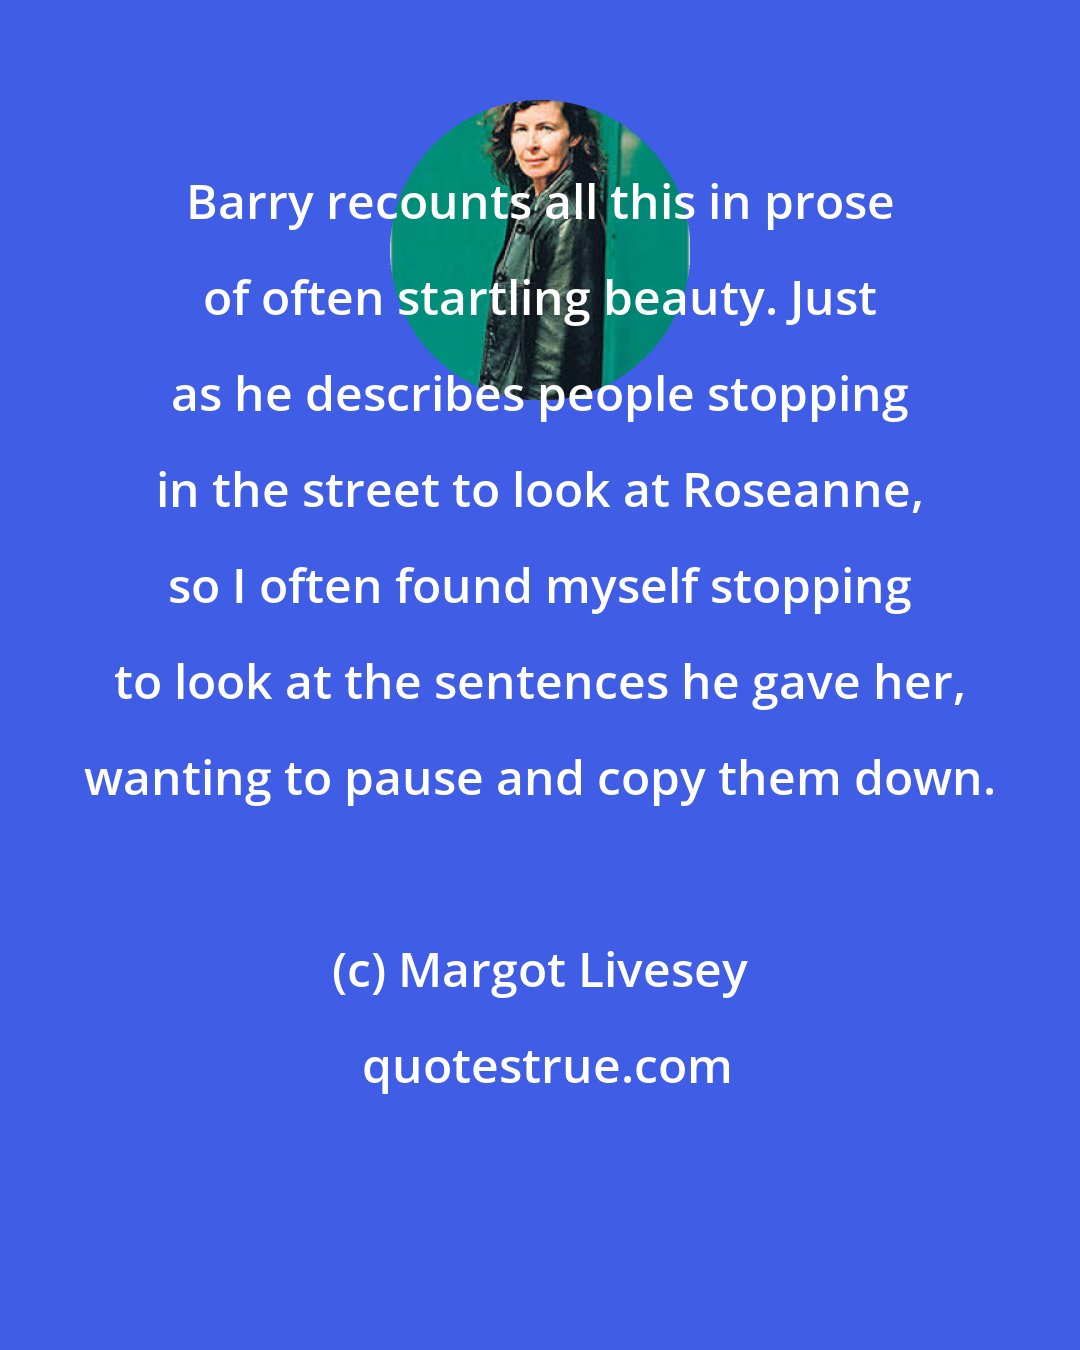 Margot Livesey: Barry recounts all this in prose of often startling beauty. Just as he describes people stopping in the street to look at Roseanne, so I often found myself stopping to look at the sentences he gave her, wanting to pause and copy them down.